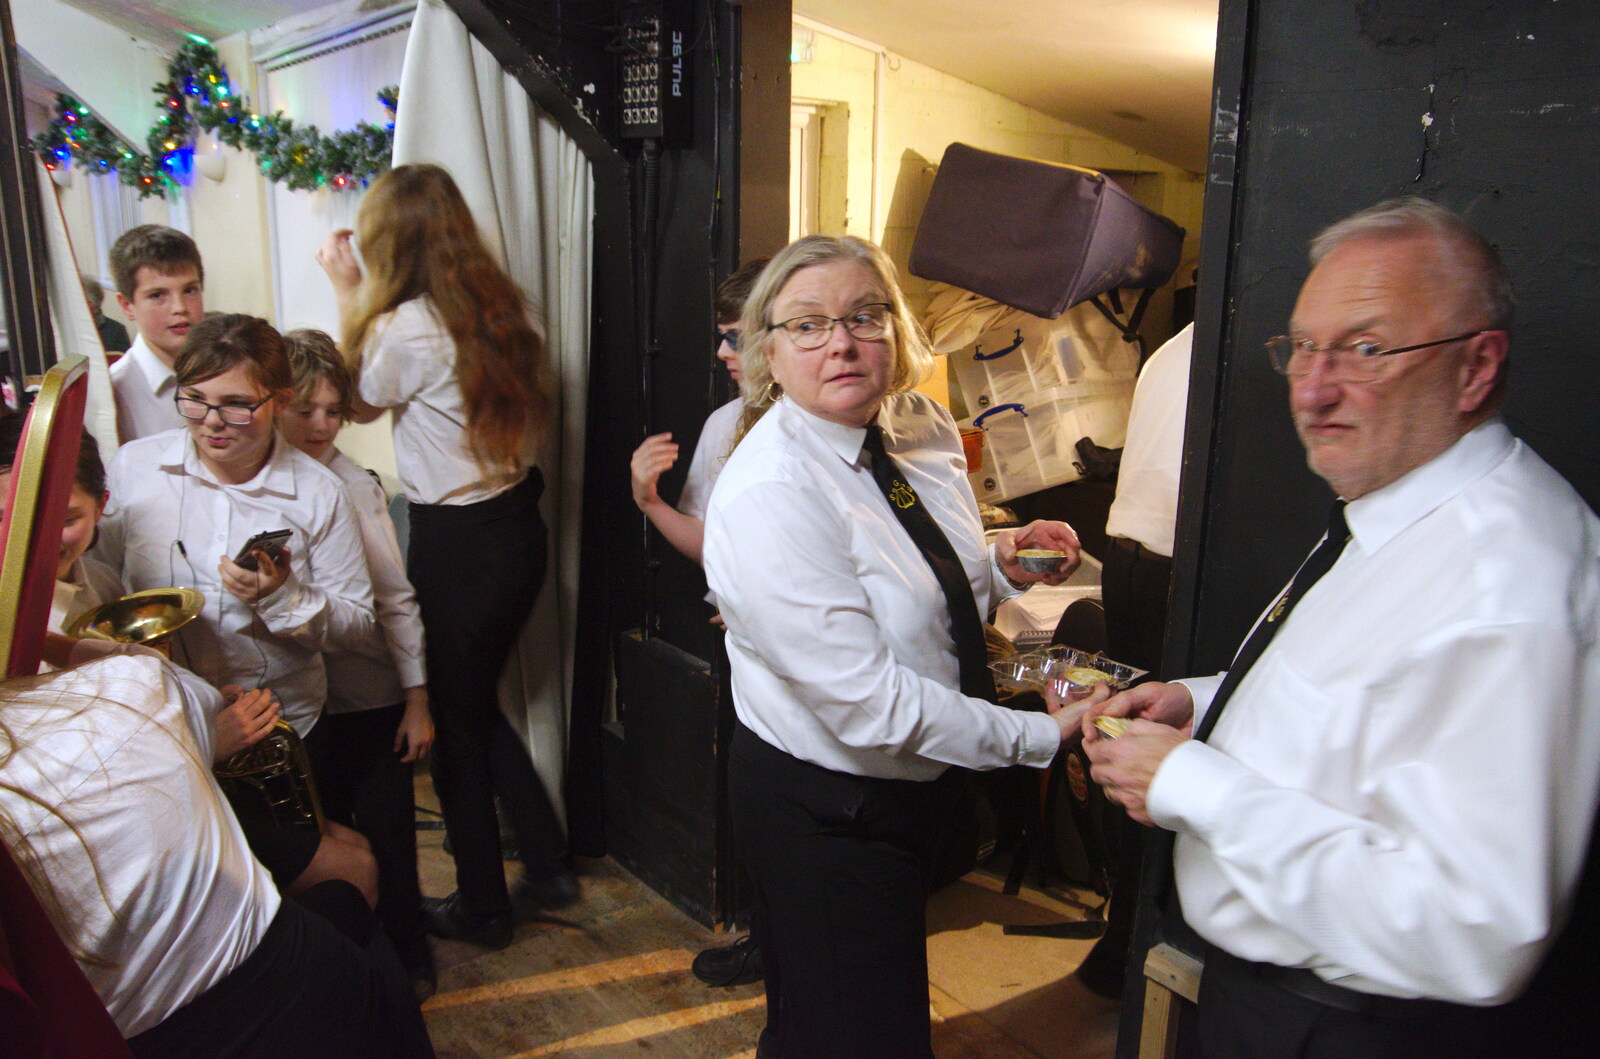 It's time for mince pies back stage from GSB Concerts and the BSCC Christmas Dinner, Suffolk - 13th December 2019